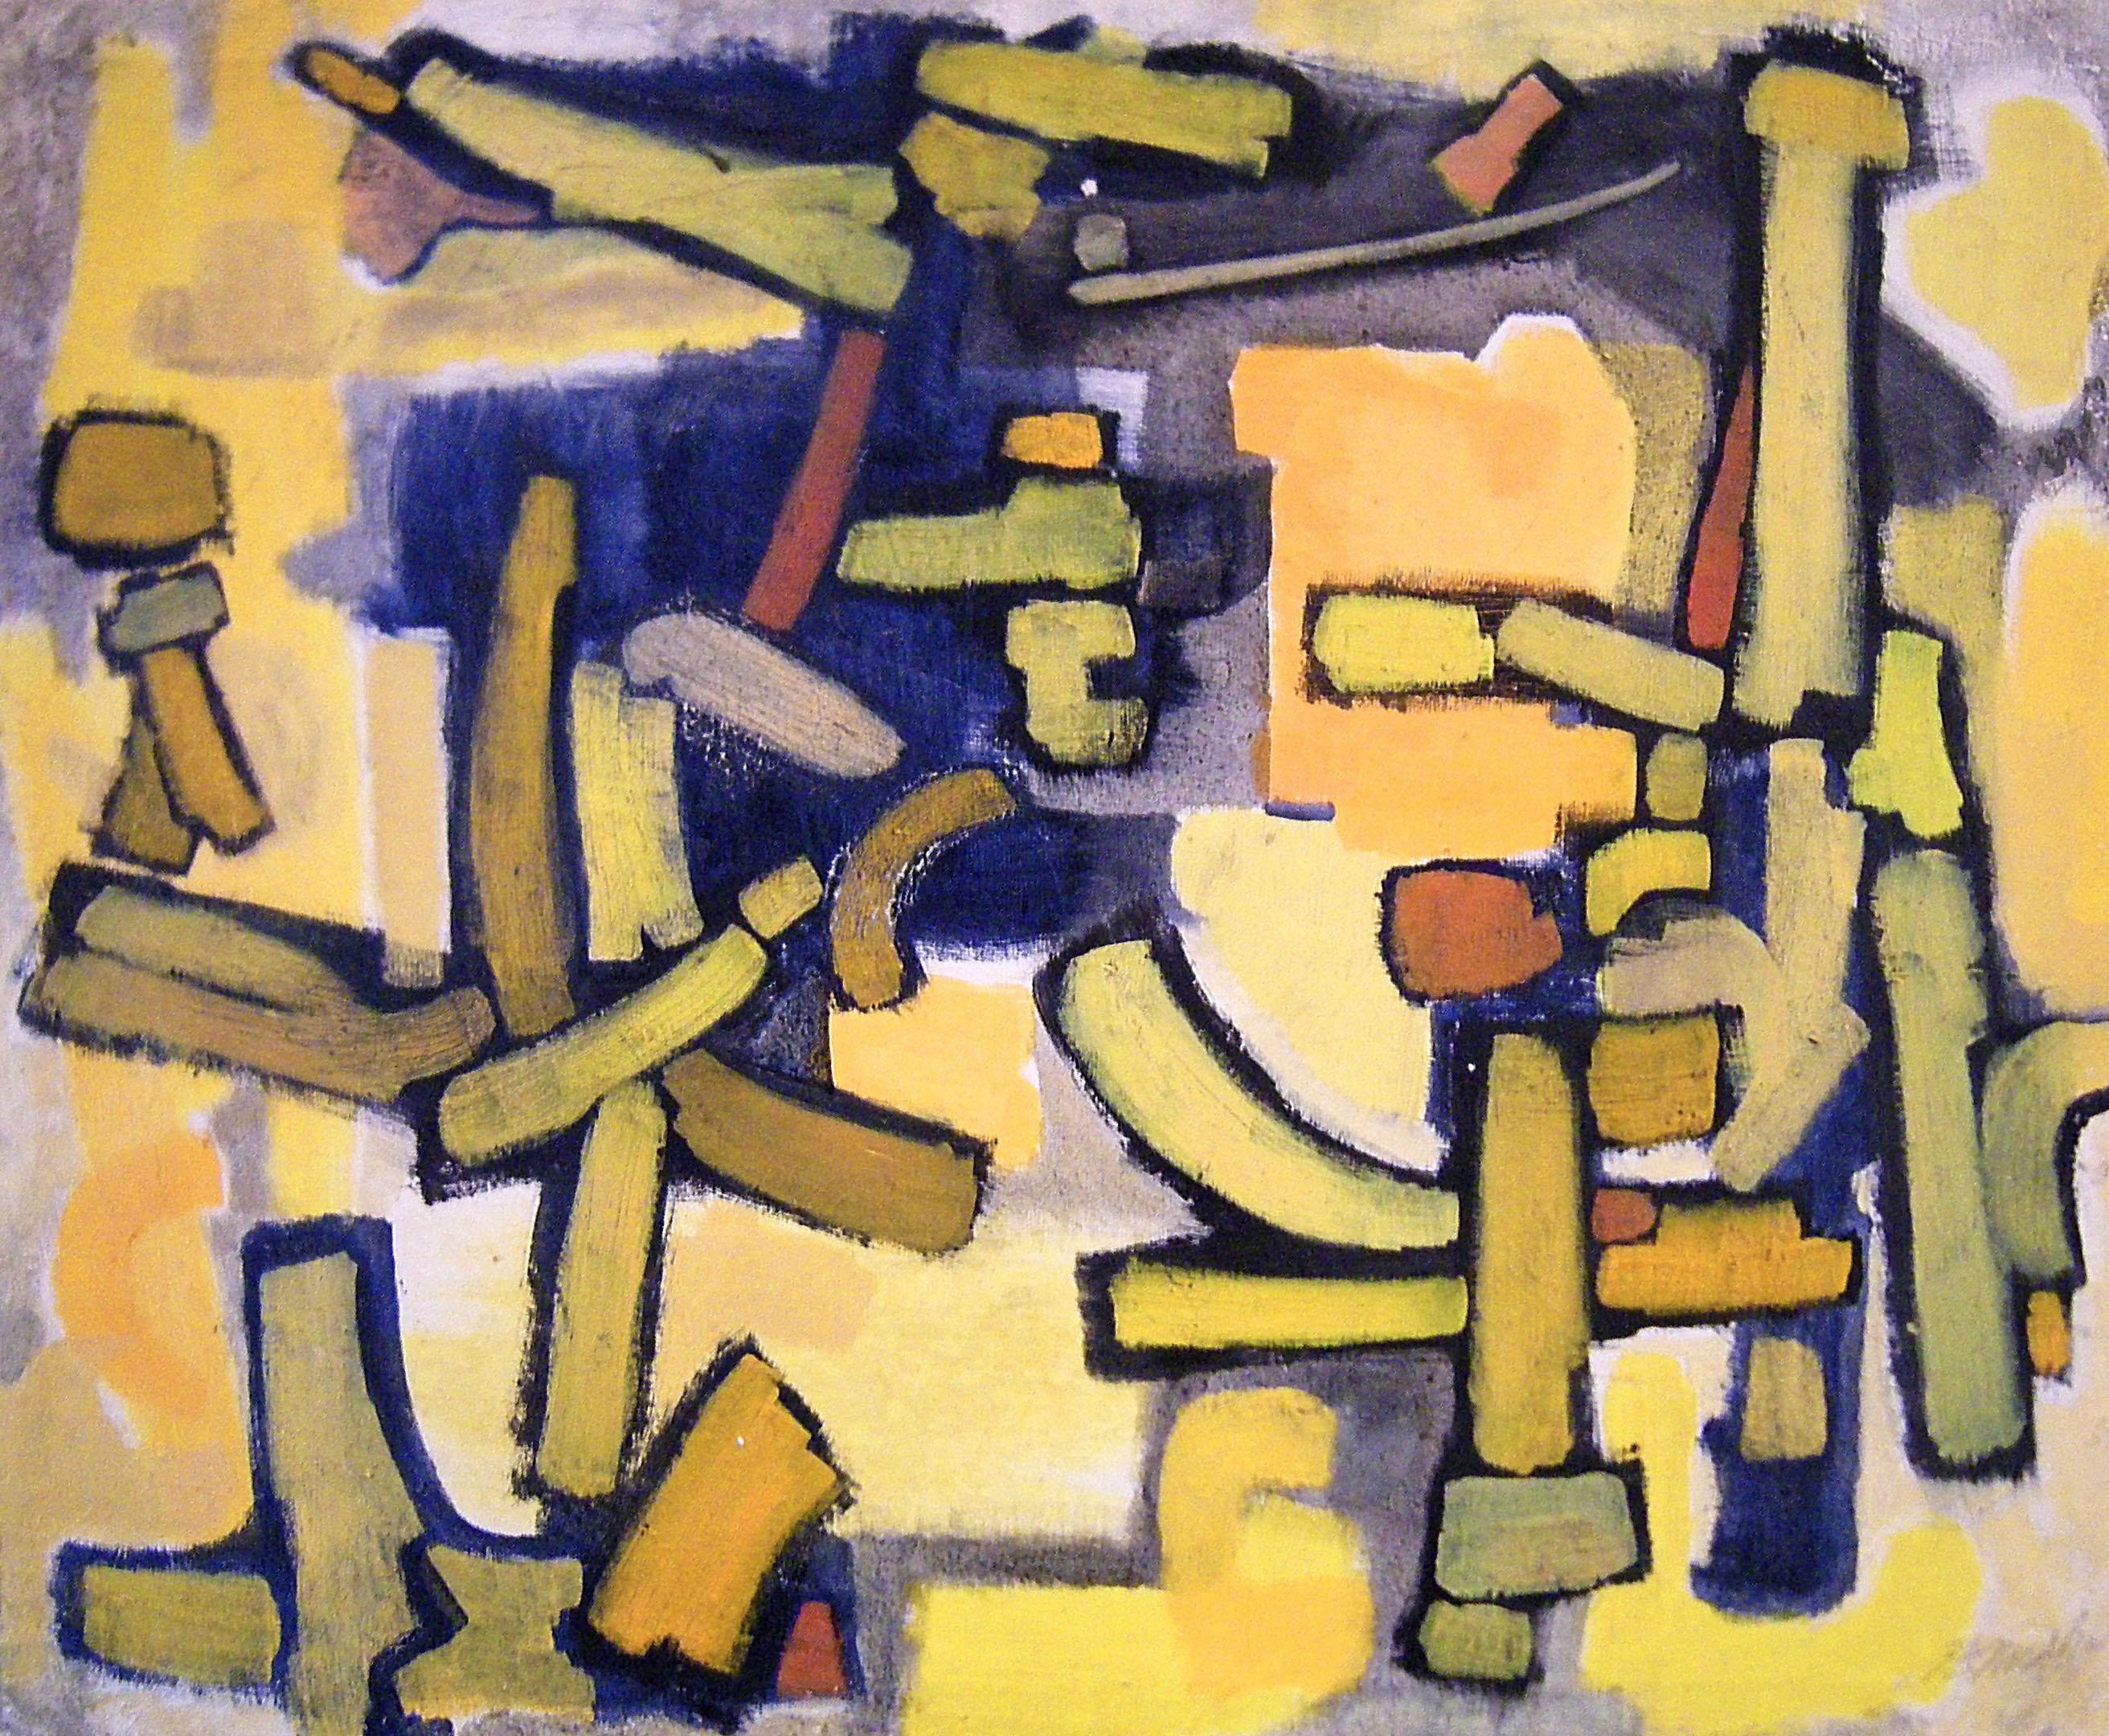 Robert Madden Abstract Painting - "Yellow Landscape" Cubist Expressionist Landscape Painting